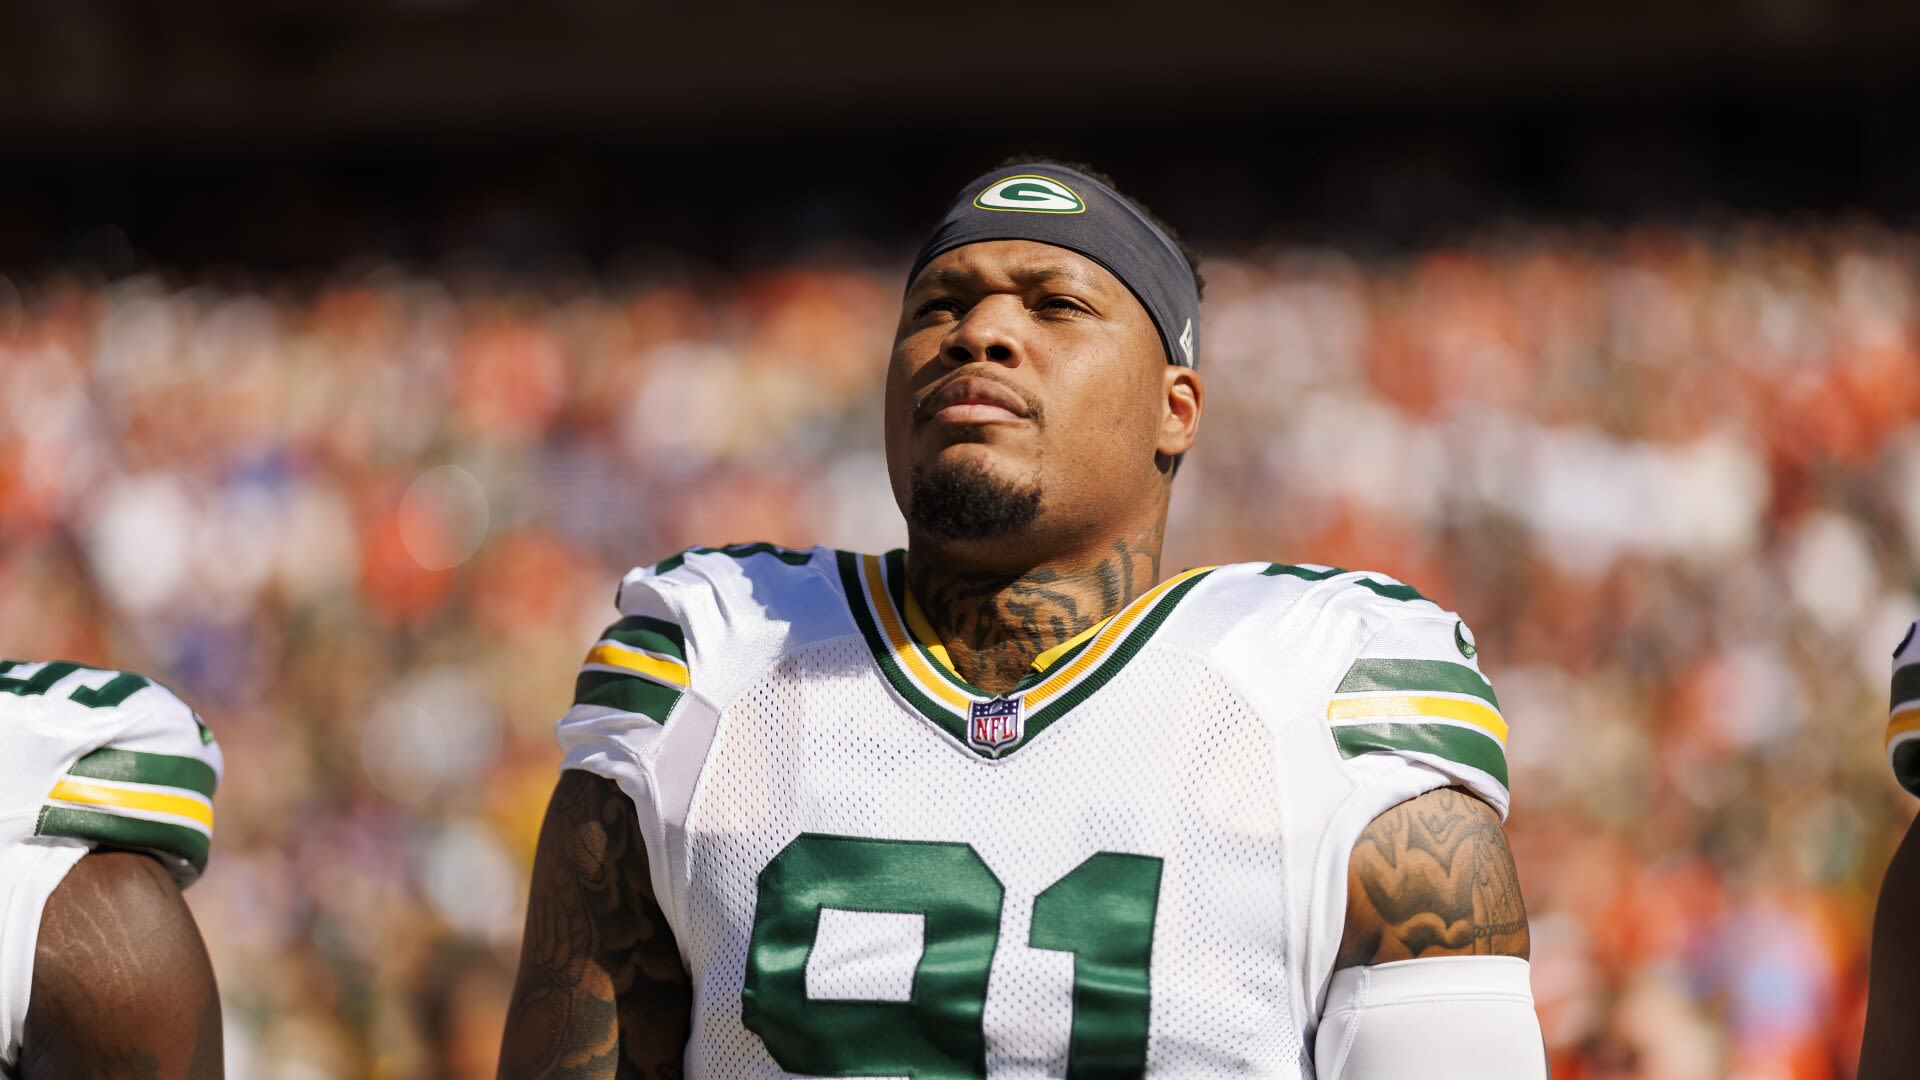 Packers DL Preston Smith says he's aging "like a fine wine"